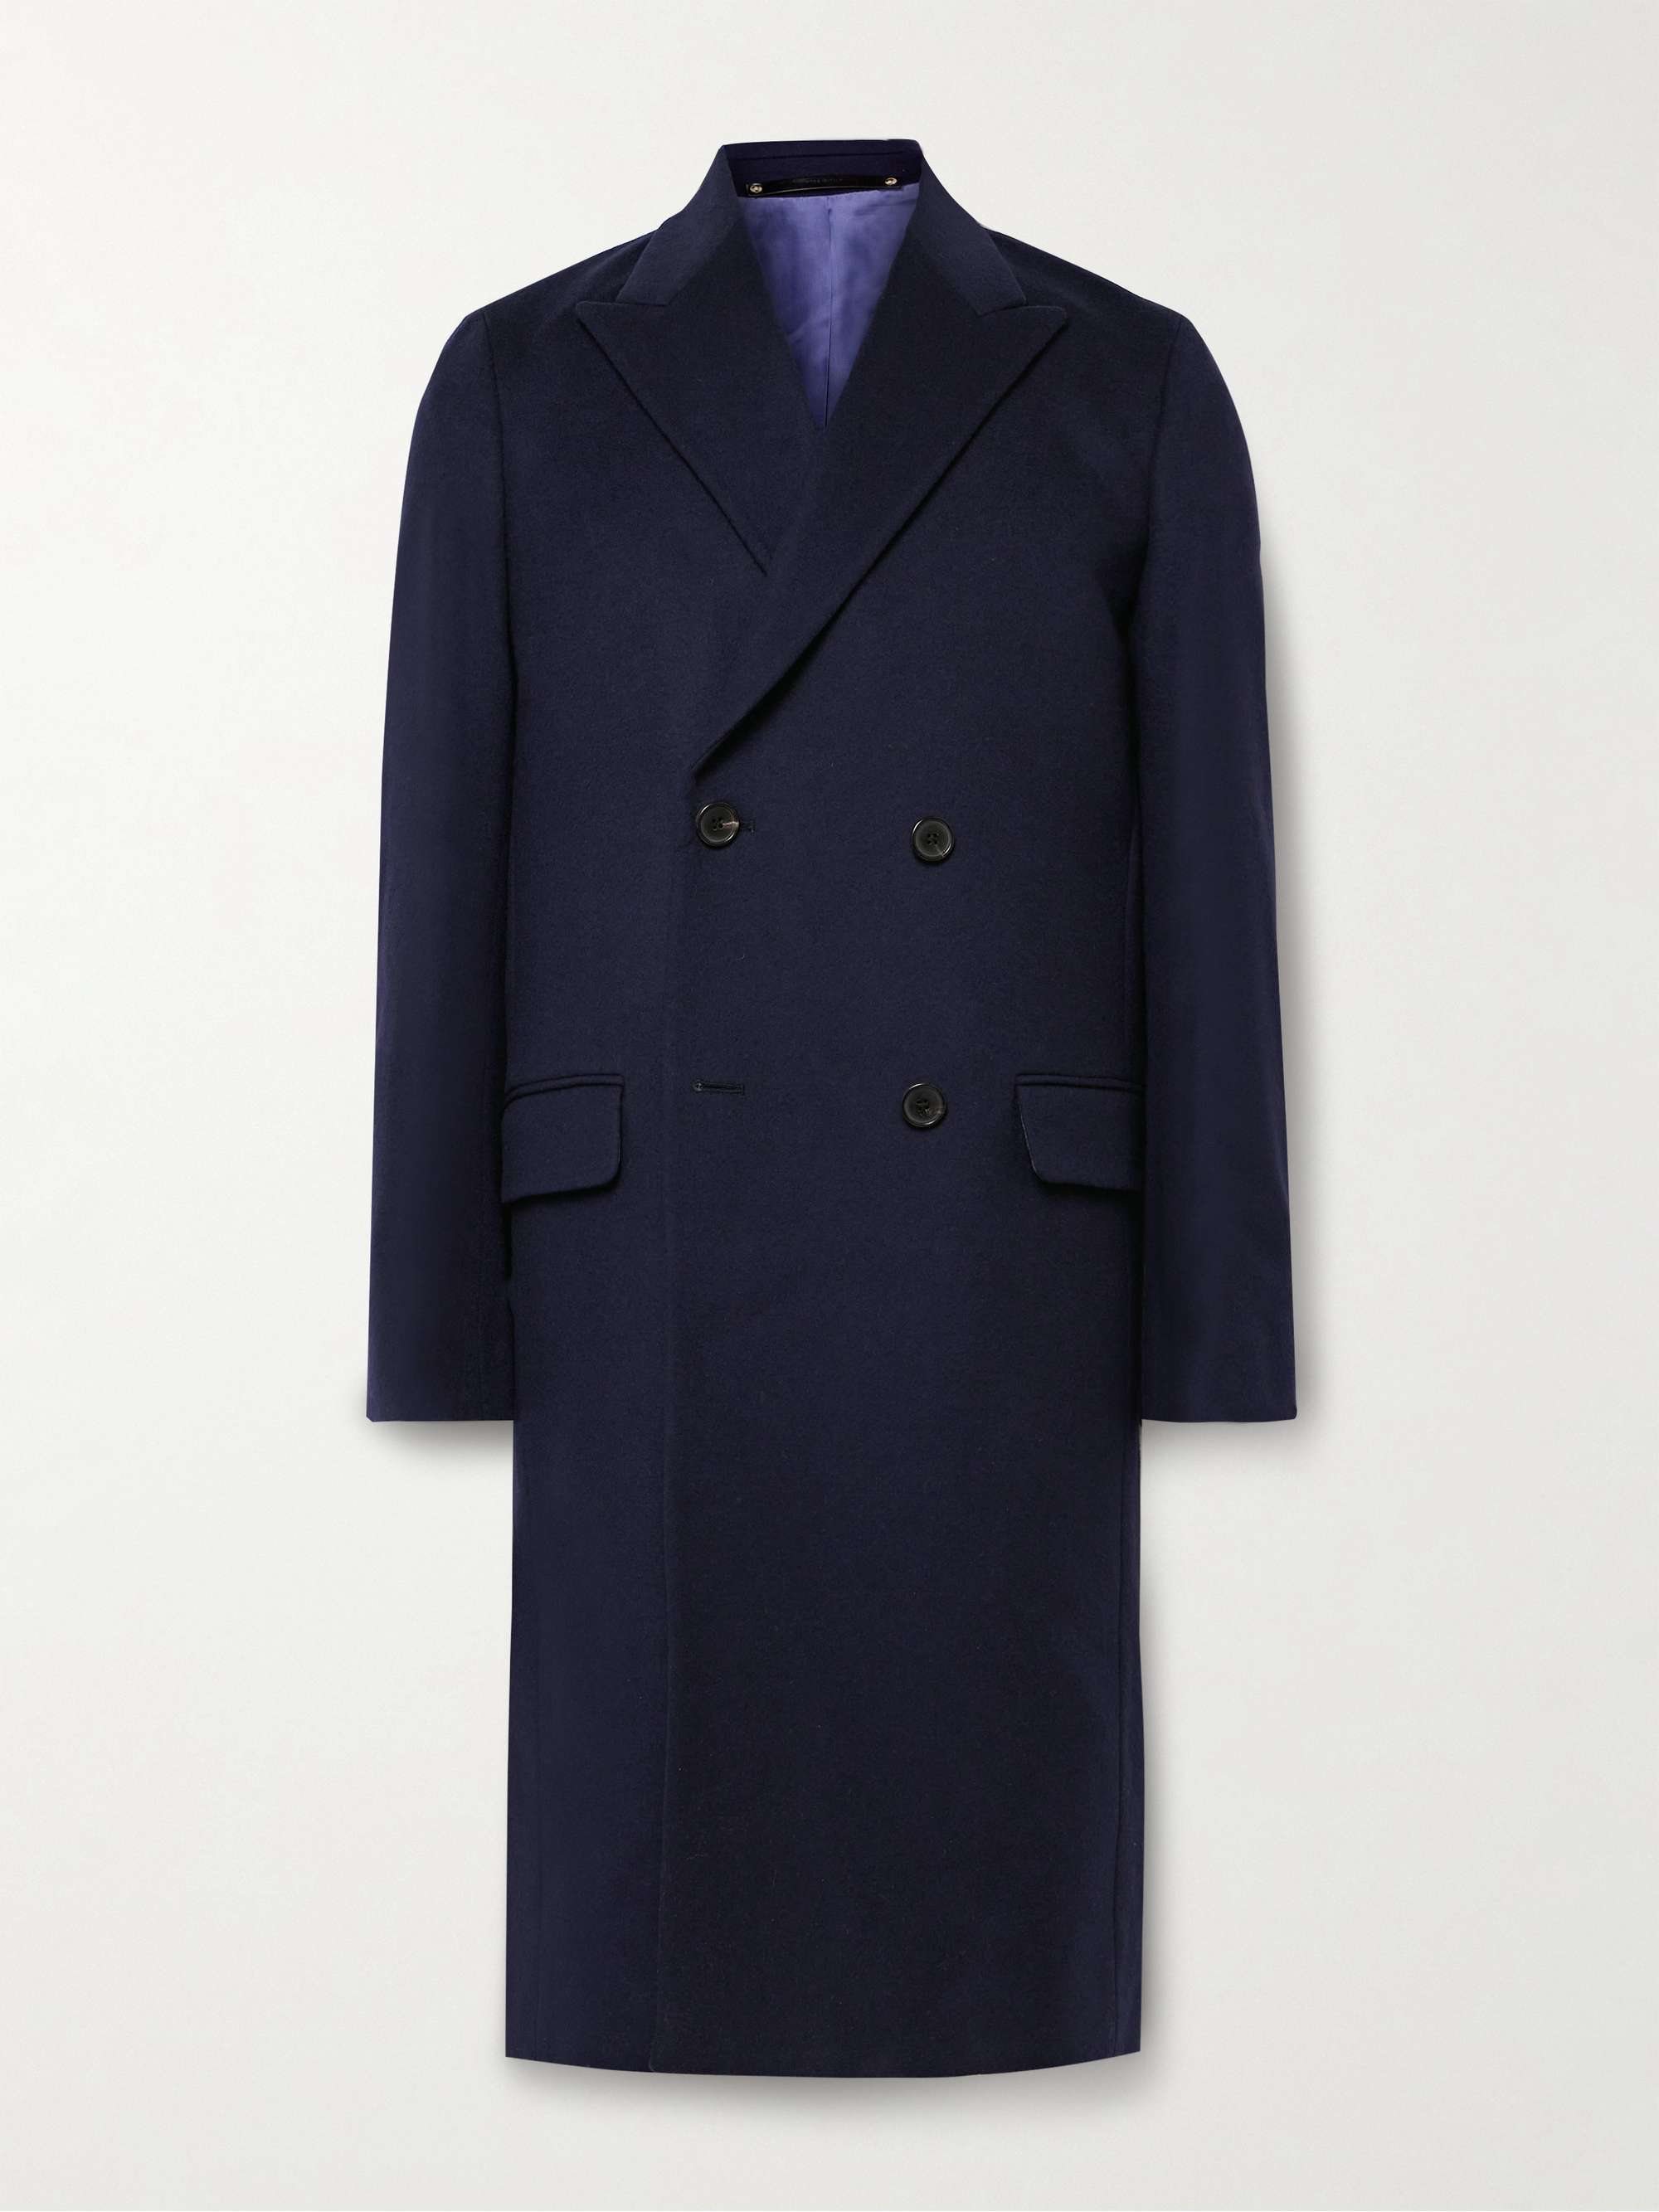 PAUL SMITH Double-Breasted Wool and Cashmere-Blend Coat for Men | MR PORTER